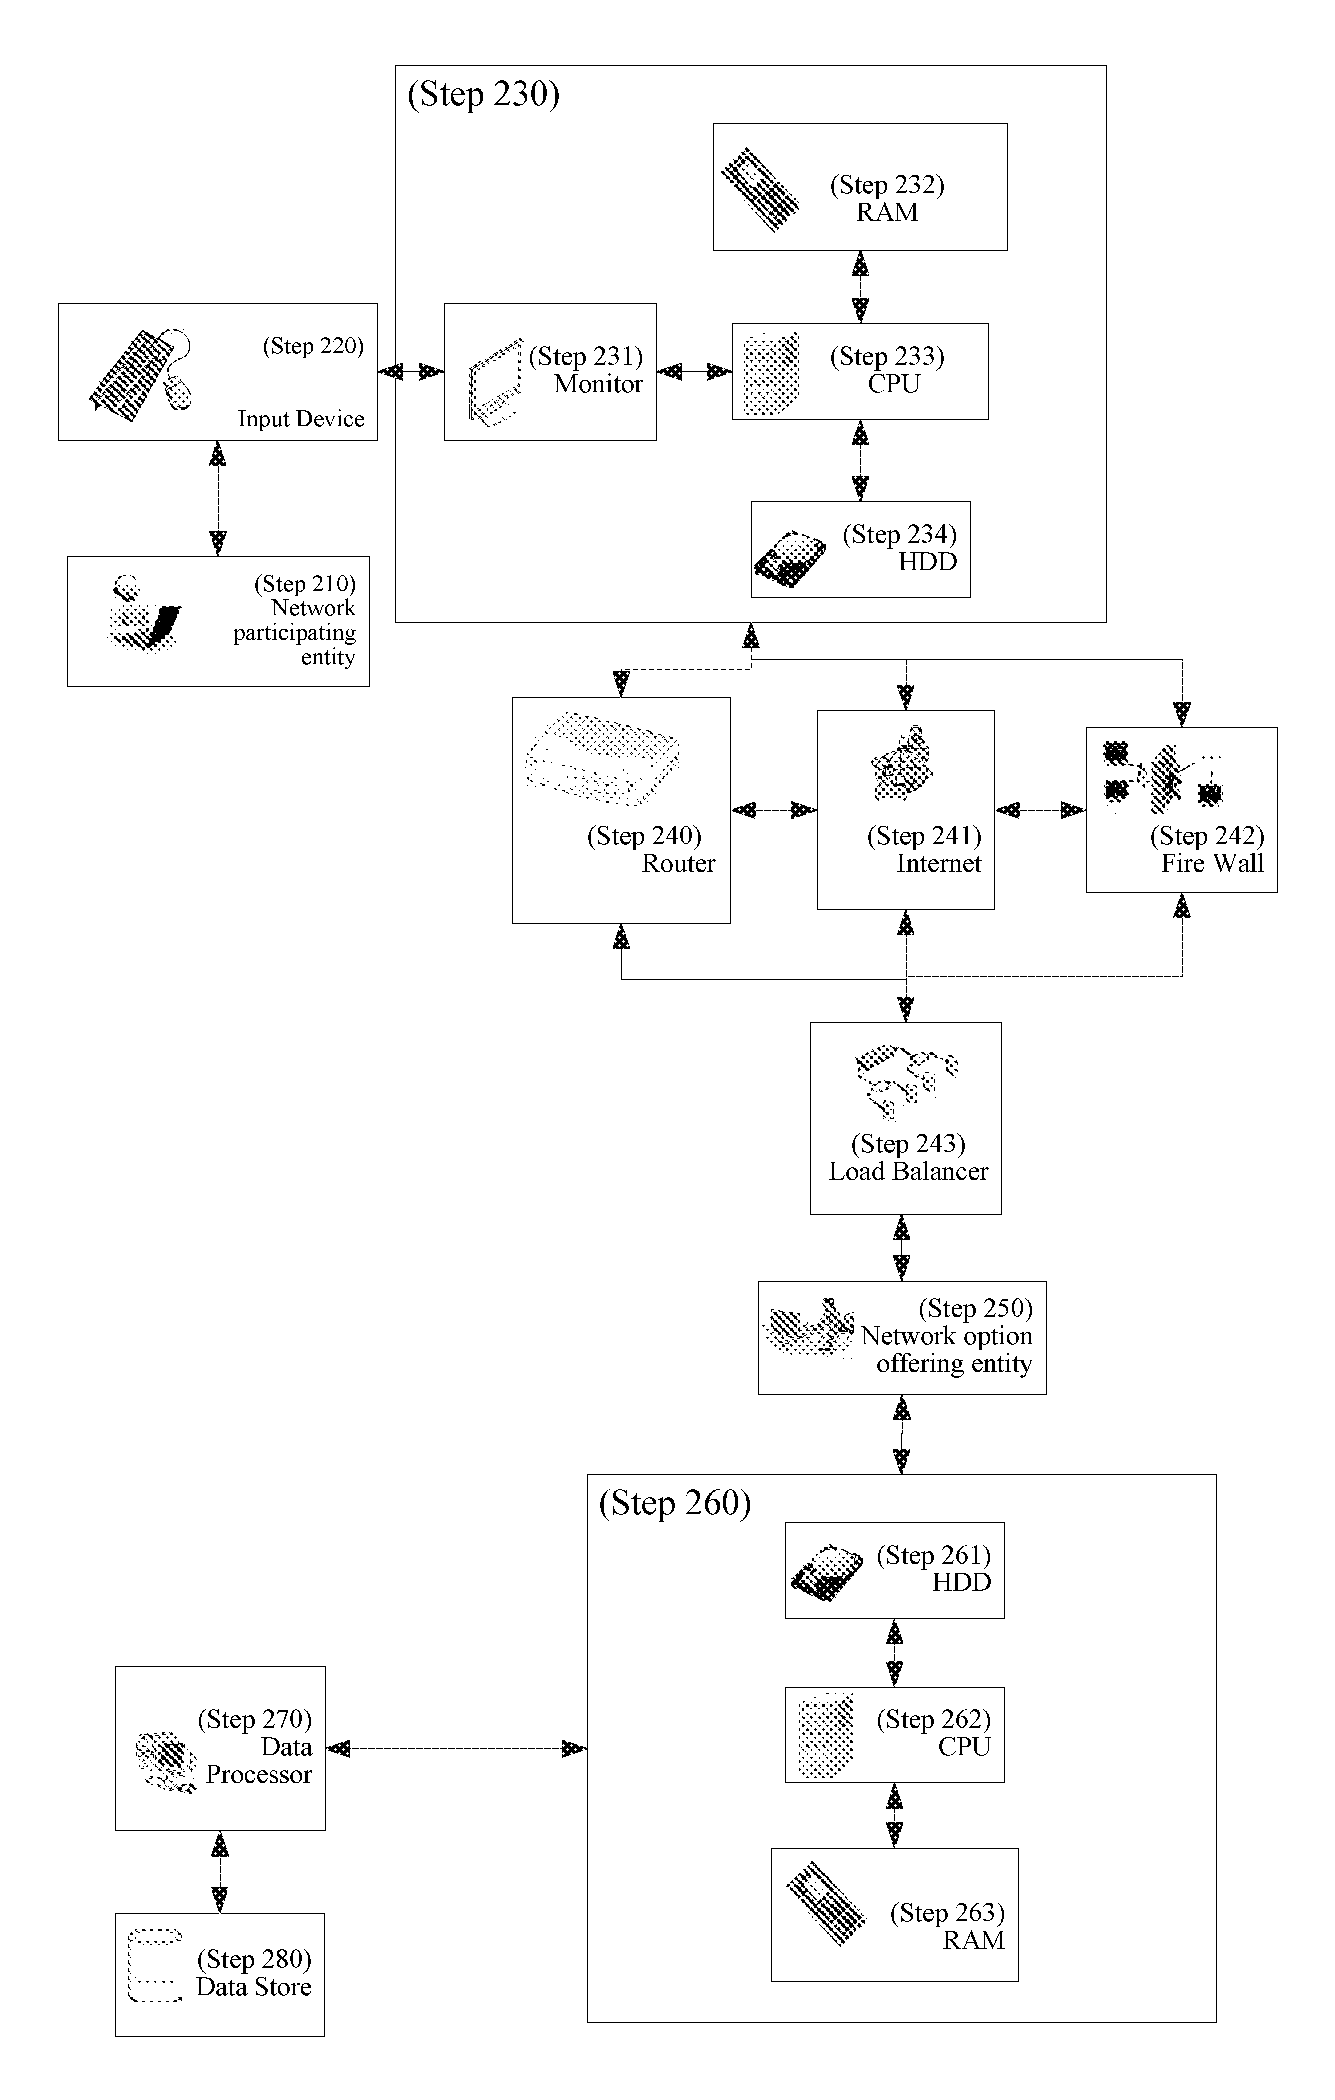 System and methodology for computer-implemented network optimization